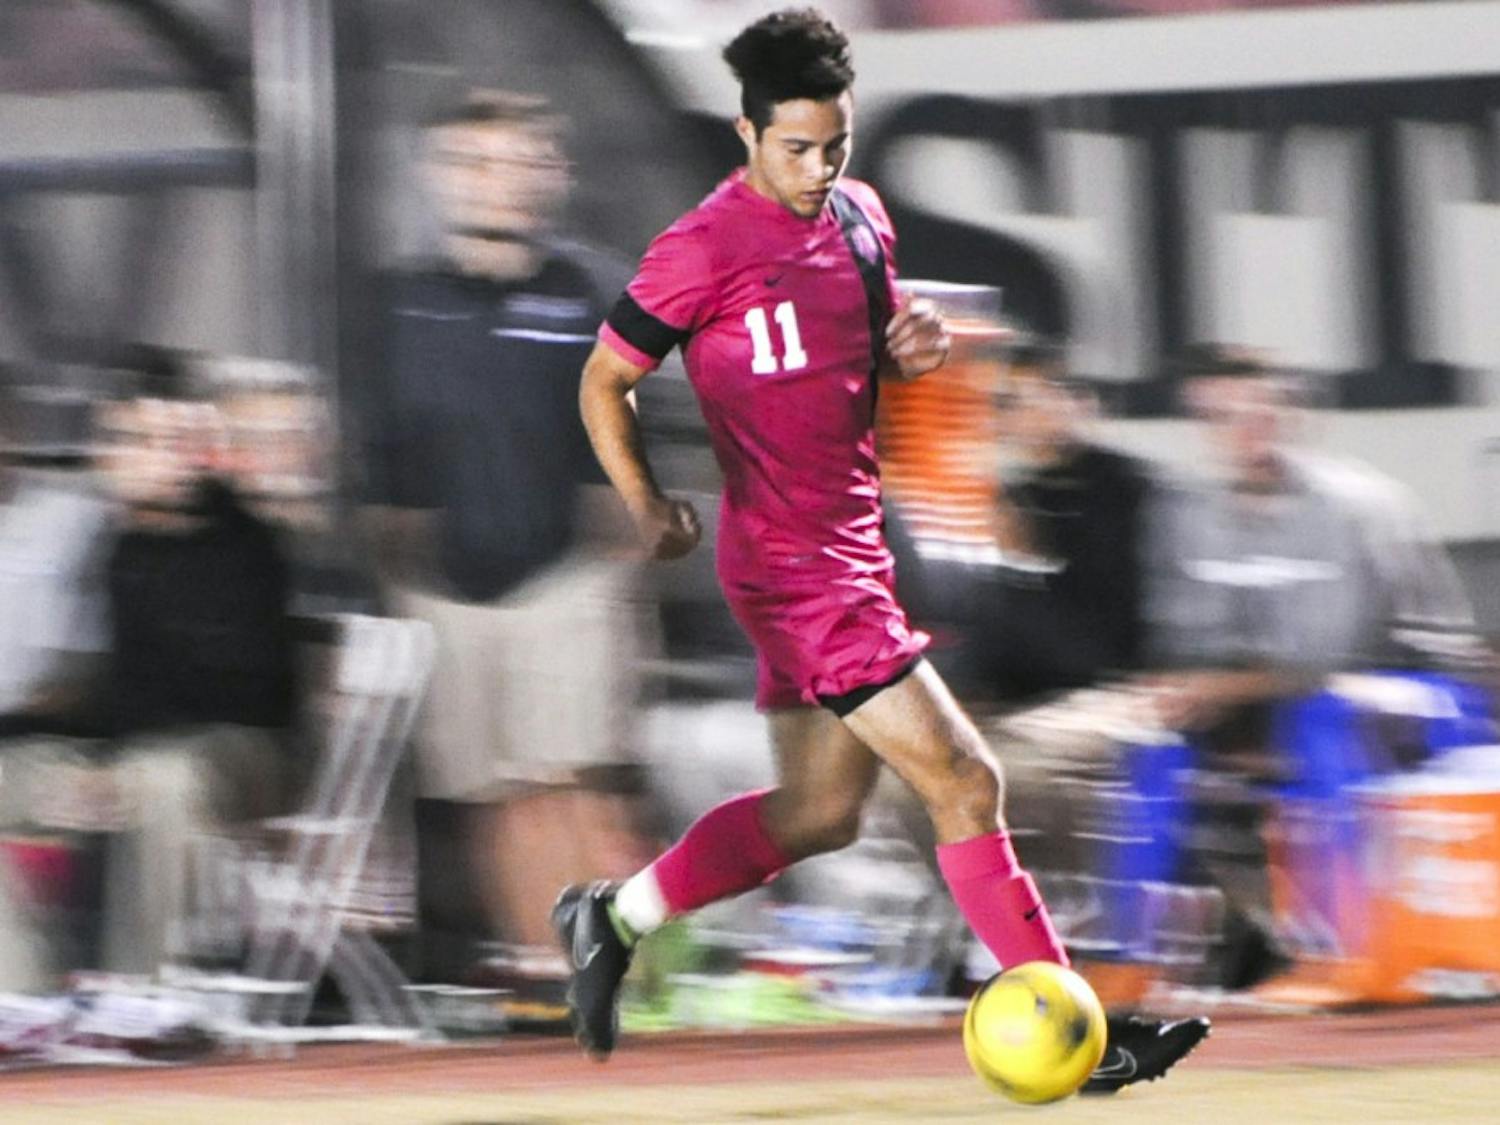 New Mexico midfielder Niko Hansen dribbles the ball downfield against Old Dominion on Saturday night at the Lobo Soccer Complex. The Lobos won 4-0.